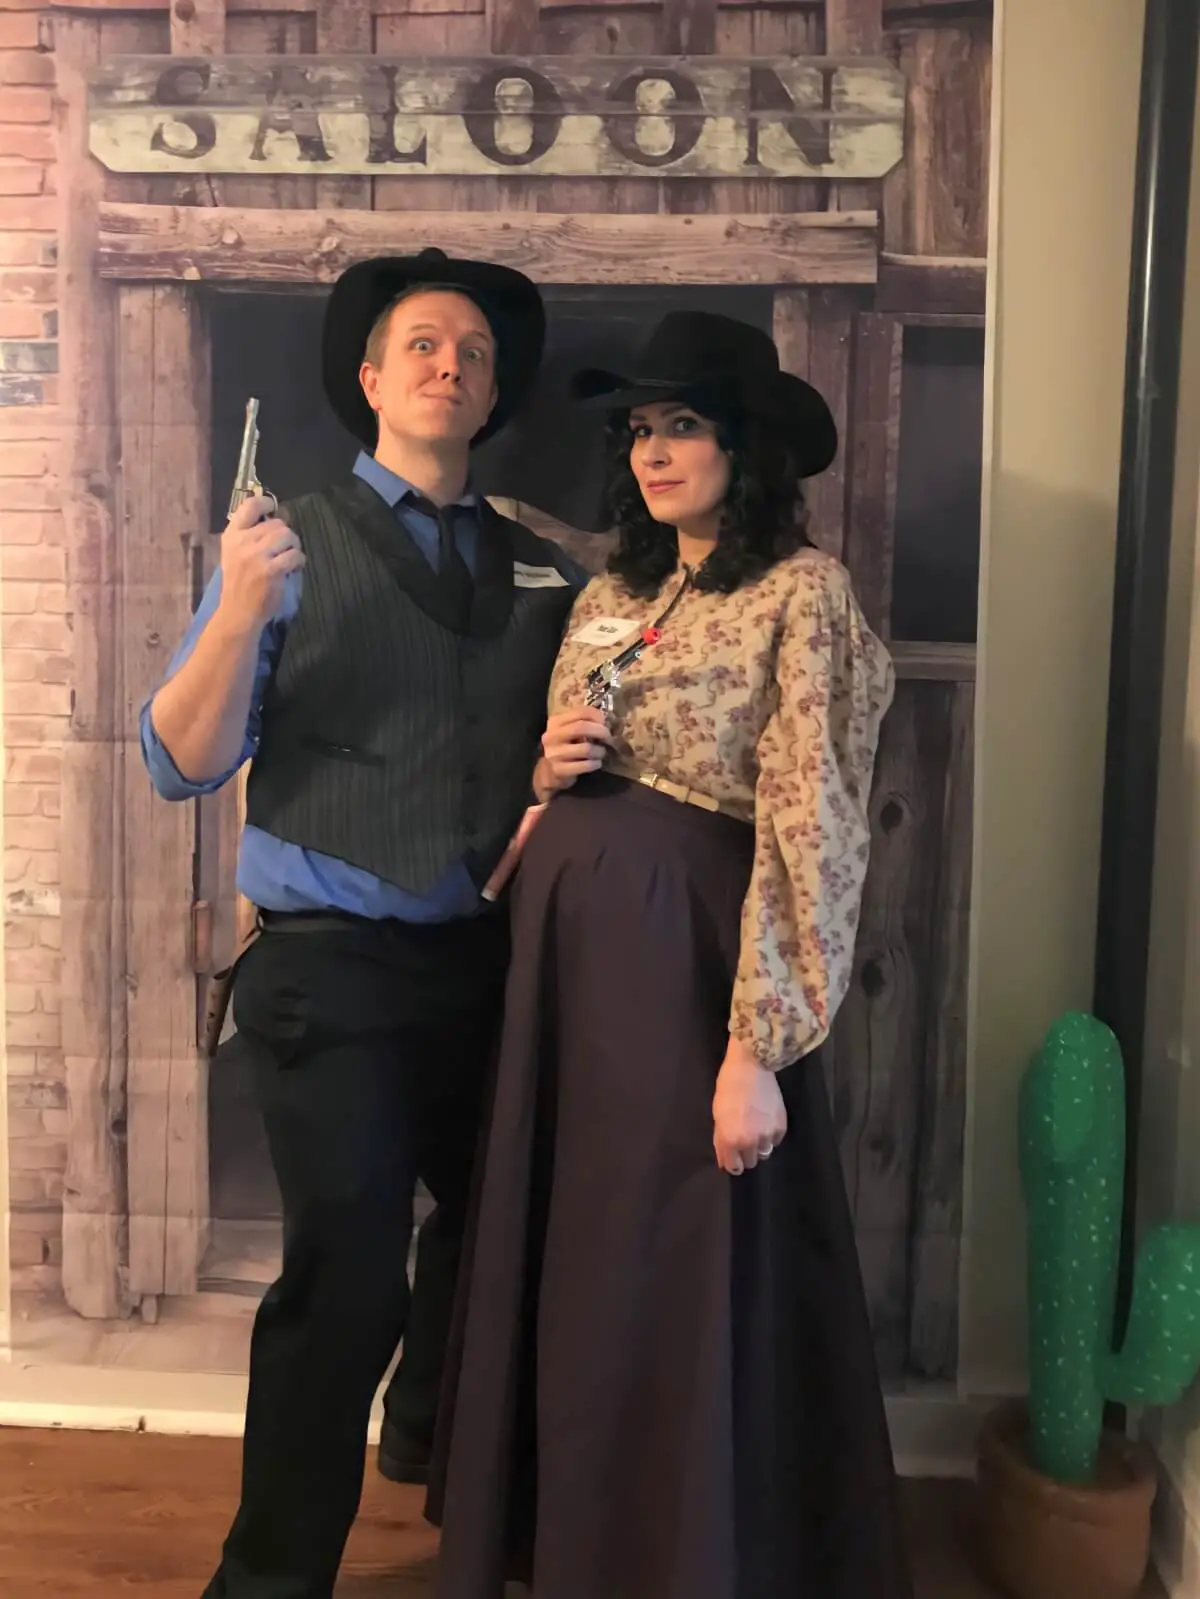 Gabe and Amy in Western costumes with a "Saloon" backdrop